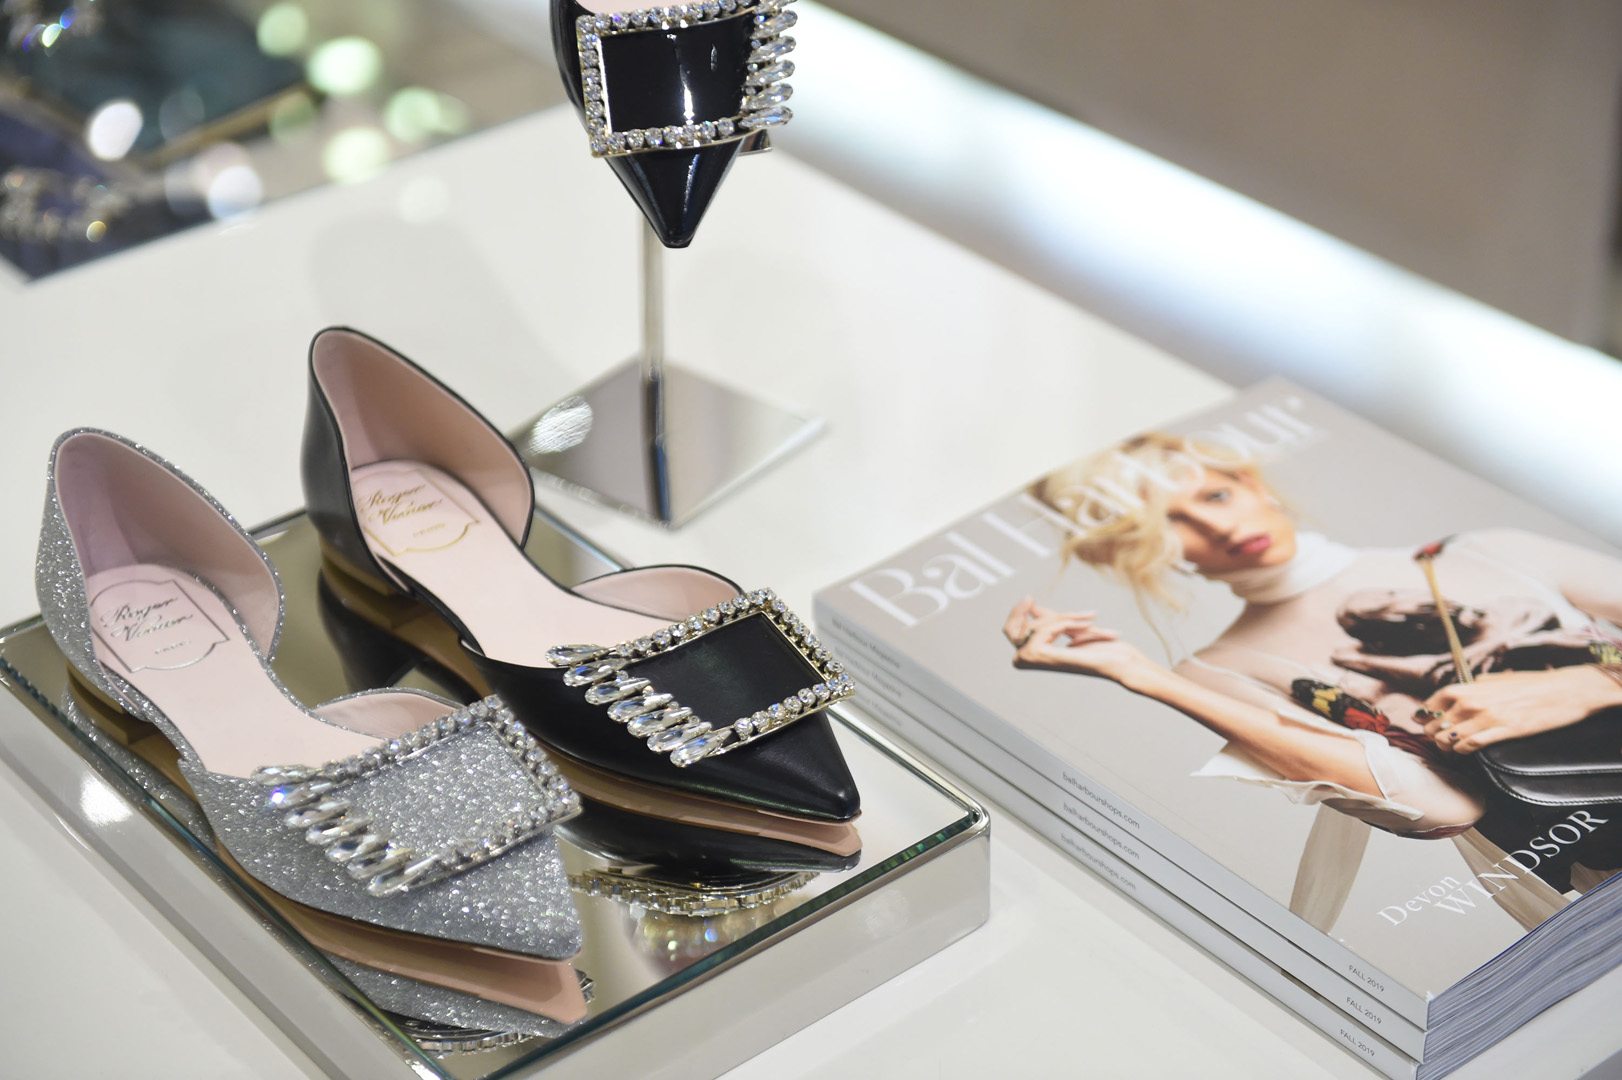 Roger Vivier Bal Harbour celebrates their 10th anniversary at Bal Harbour Shops alongside the launch of the Fall issue of Bal Harbour Magazine